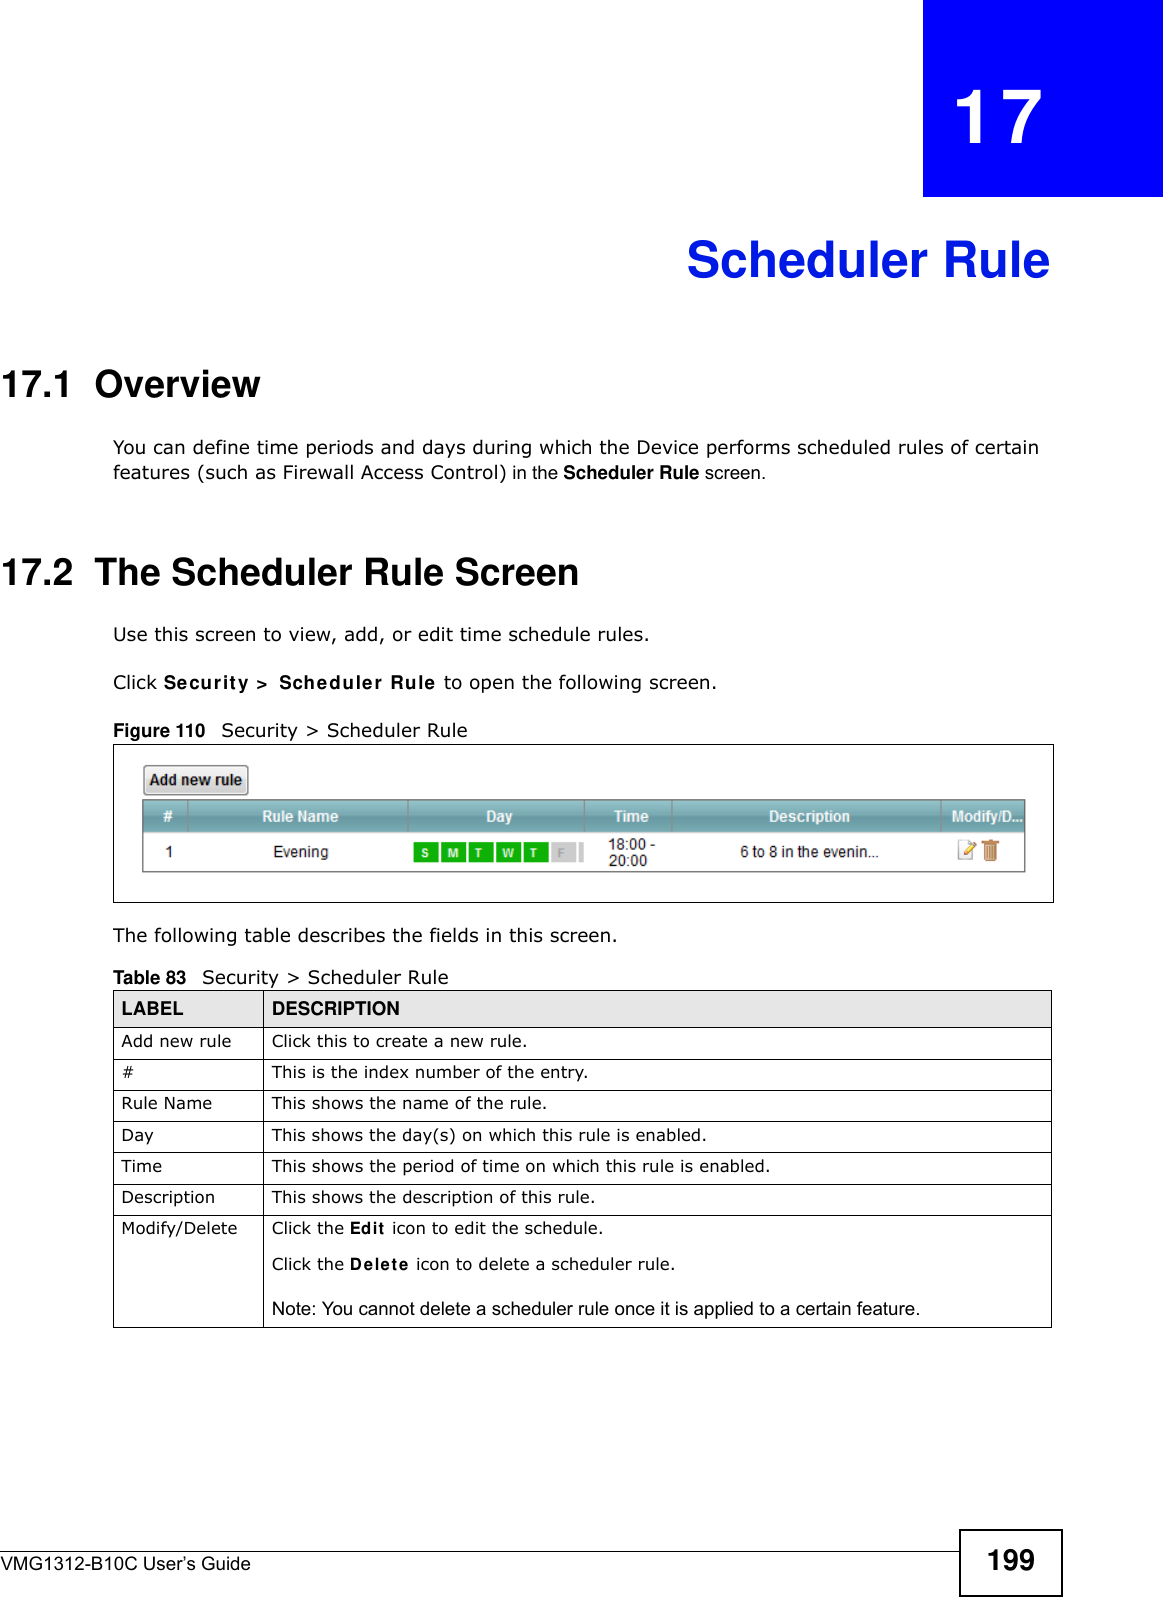 VMG1312-B10C User’s Guide 199CHAPTER   17Scheduler Rule17.1  OverviewYou can define time periods and days during which the Device performs scheduled rules of certain features (such as Firewall Access Control) in the Scheduler Rule screen. 17.2  The Scheduler Rule ScreenUse this screen to view, add, or edit time schedule rules.Click Securit y &gt;  Sche dule r  Rule  to open the following screen. Figure 110   Security &gt; Scheduler Rule The following table describes the fields in this screen. Table 83   Security &gt; Scheduler RuleLABEL DESCRIPTIONAdd new rule Click this to create a new rule.#This is the index number of the entry.Rule Name This shows the name of the rule.Day This shows the day(s) on which this rule is enabled.Time This shows the period of time on which this rule is enabled.Description This shows the description of this rule.Modify/Delete Click the Ed it  icon to edit the schedule.Click the De le t e icon to delete a scheduler rule.Note: You cannot delete a scheduler rule once it is applied to a certain feature.